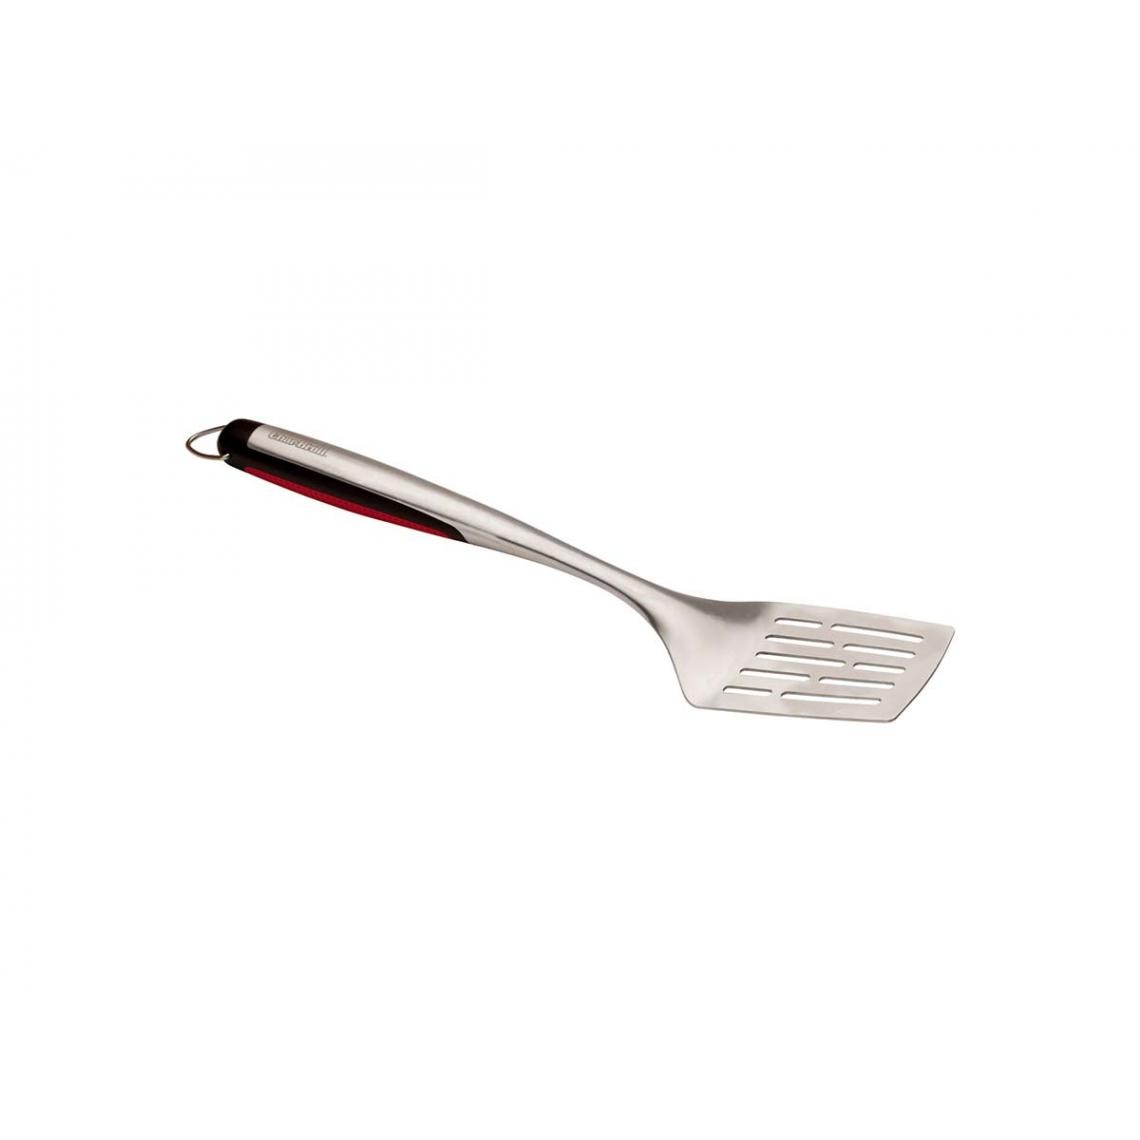 Char-Broil - Spatule pour barbecue Char-Broil - Accessoires barbecue